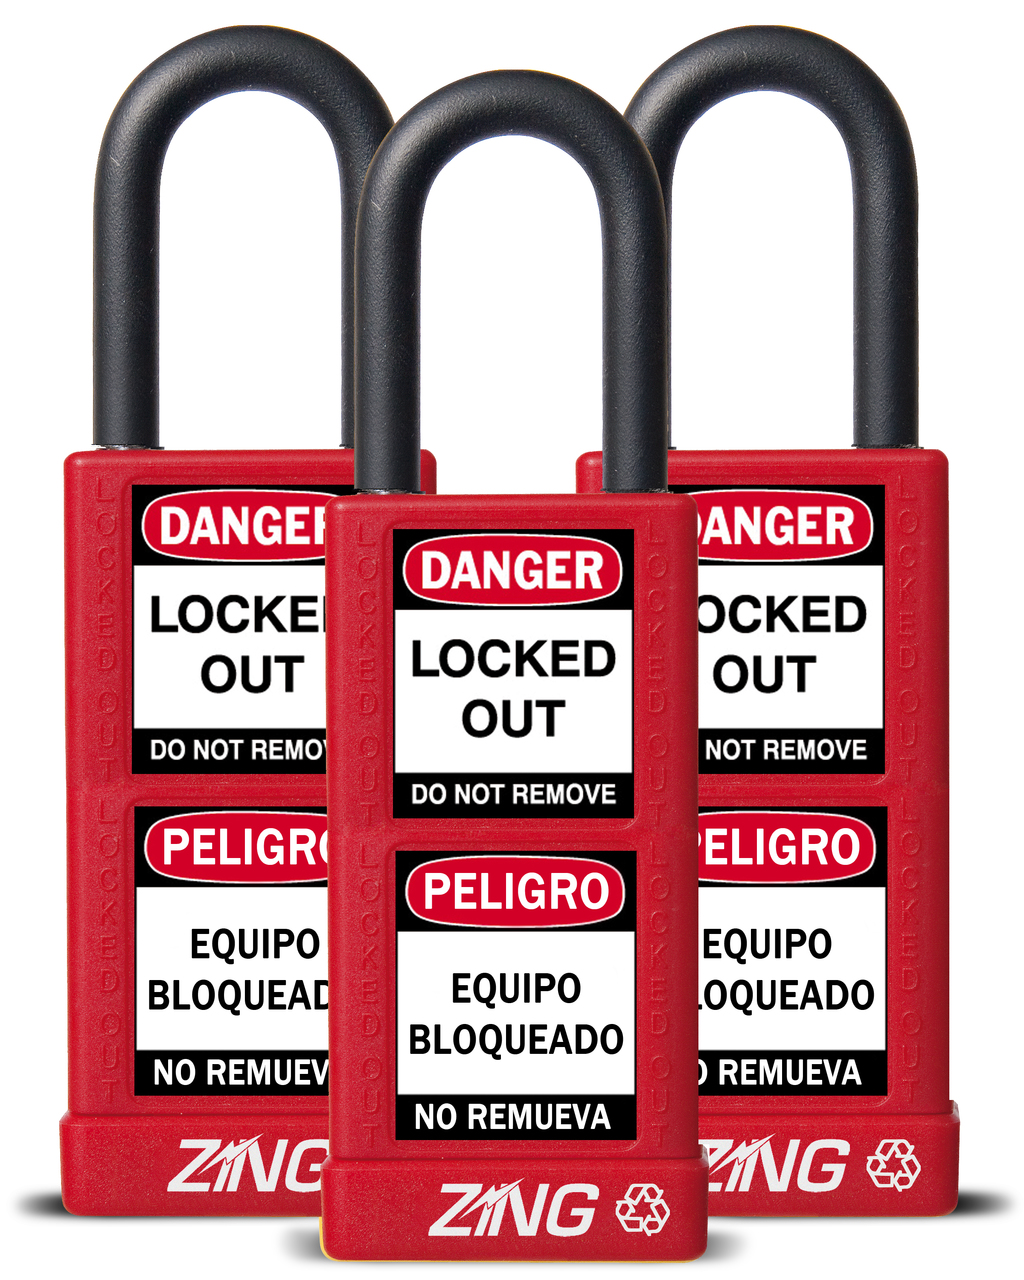 ZING RecycLock Safety Padlock, Keyed Alike,1-1/2" Shackle, 3" Long Body, Red, 3 Pack